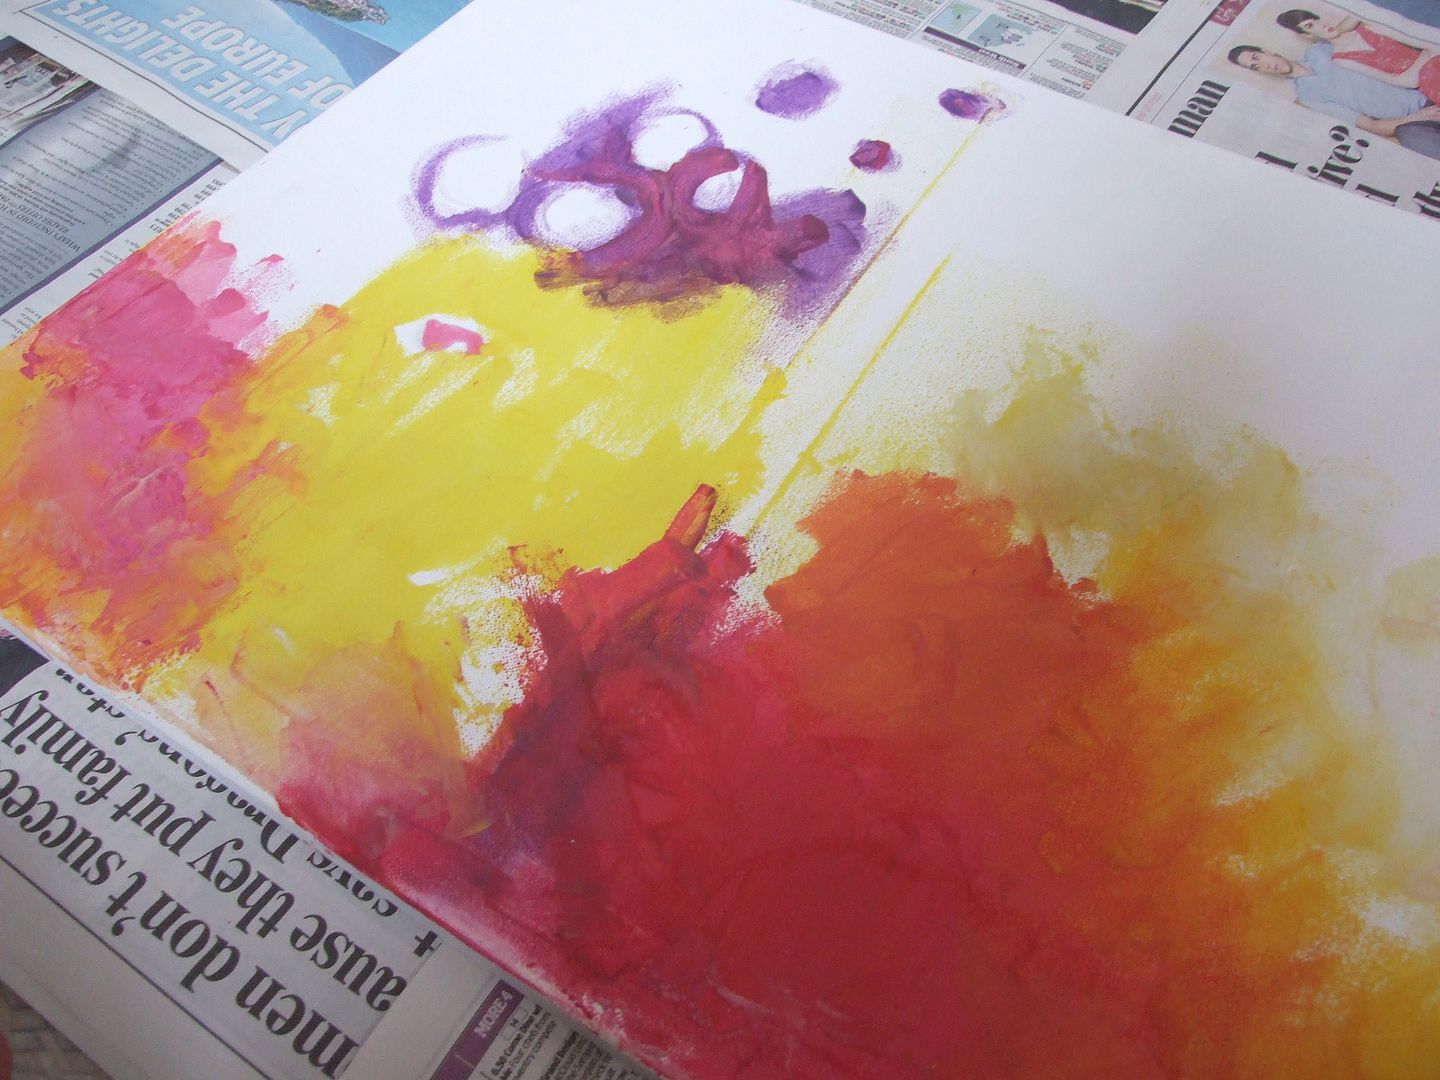 Painting with melted crayons - Gathering Beauty